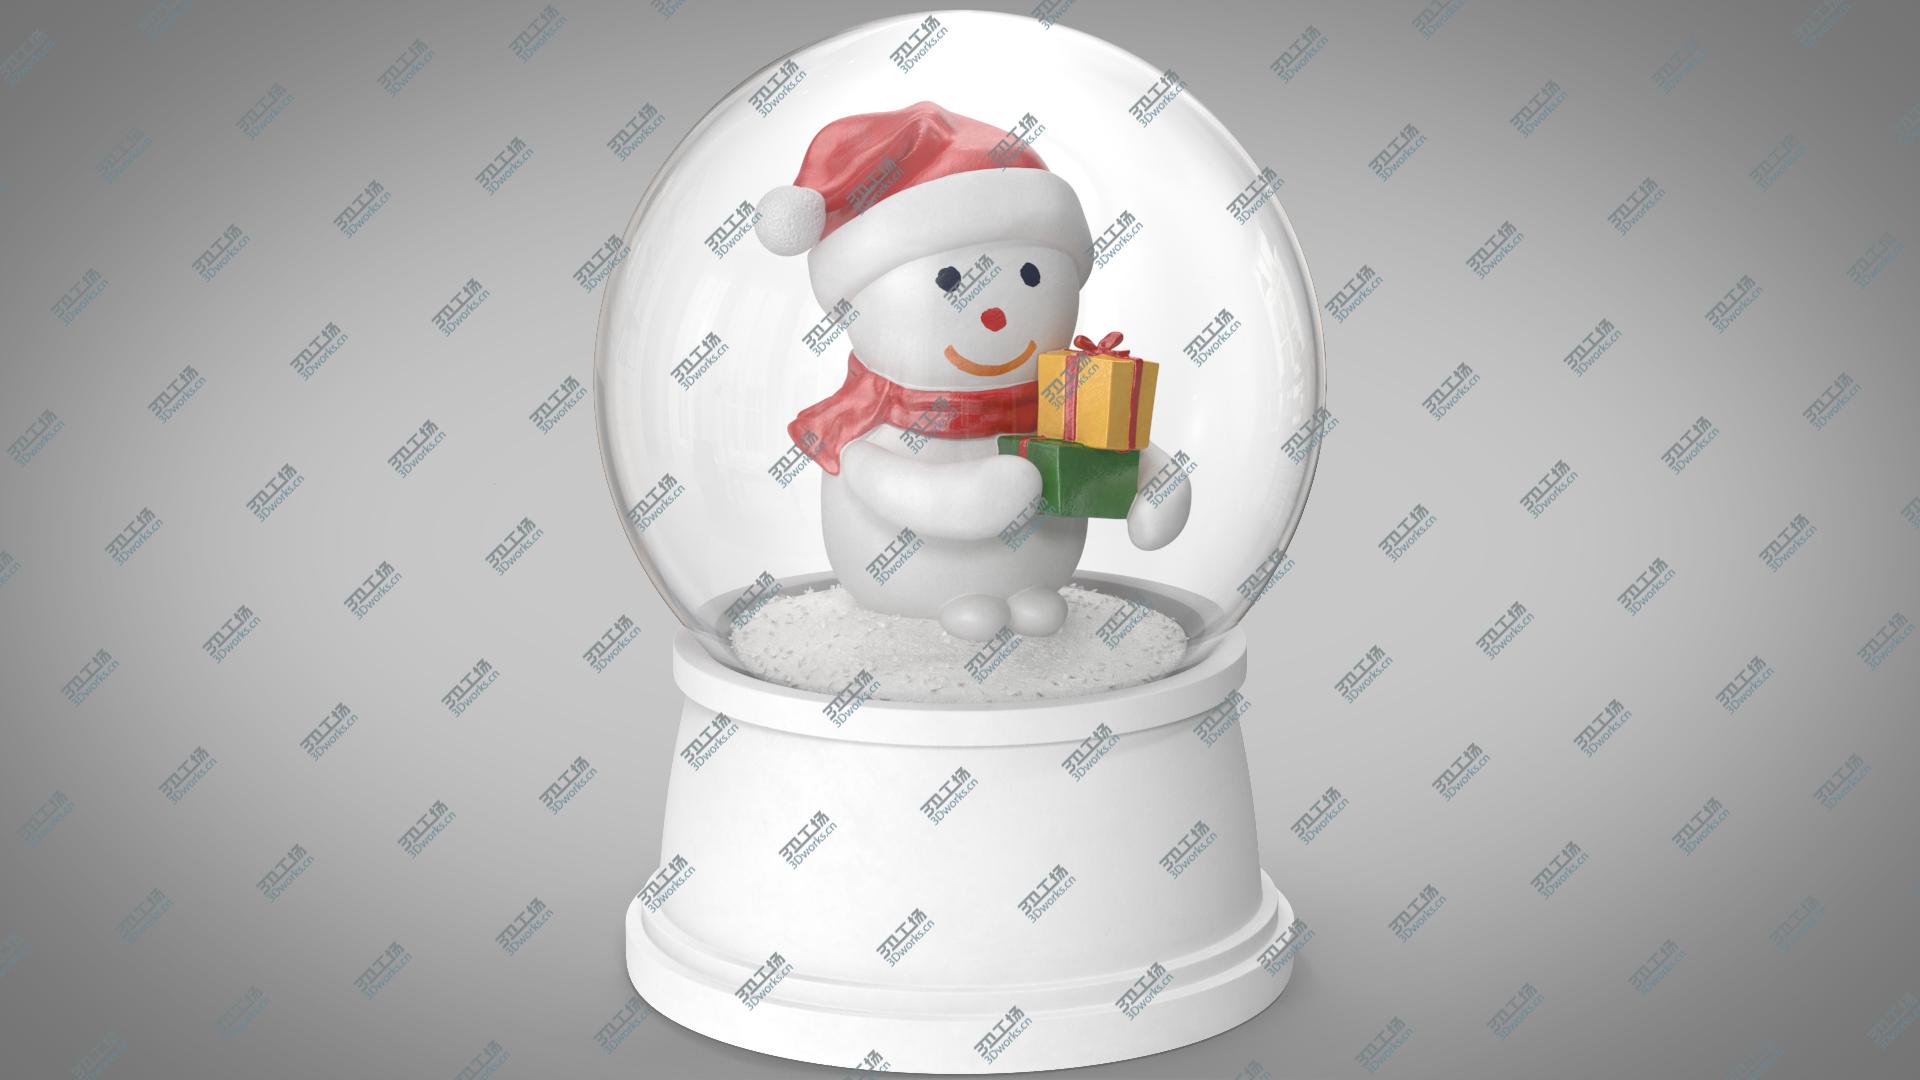 images/goods_img/2021040161/3D Snow Globe with a Snowman 5/1.jpg